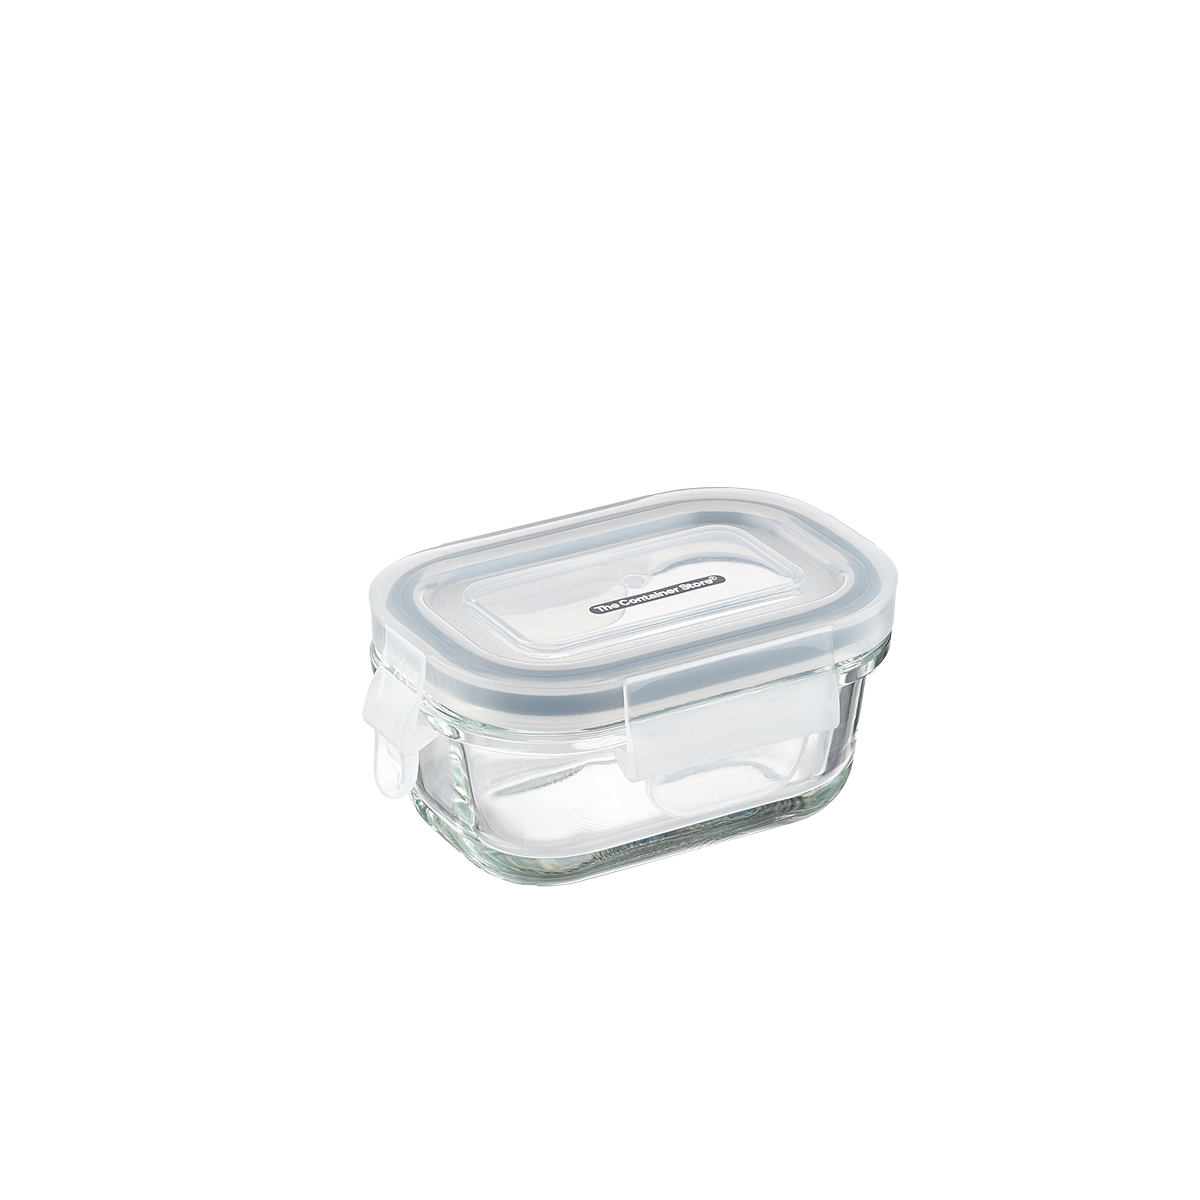 https://www.containerstore.com/catalogimages/383236/10079291-borosilicate-food-storage-r.jpg